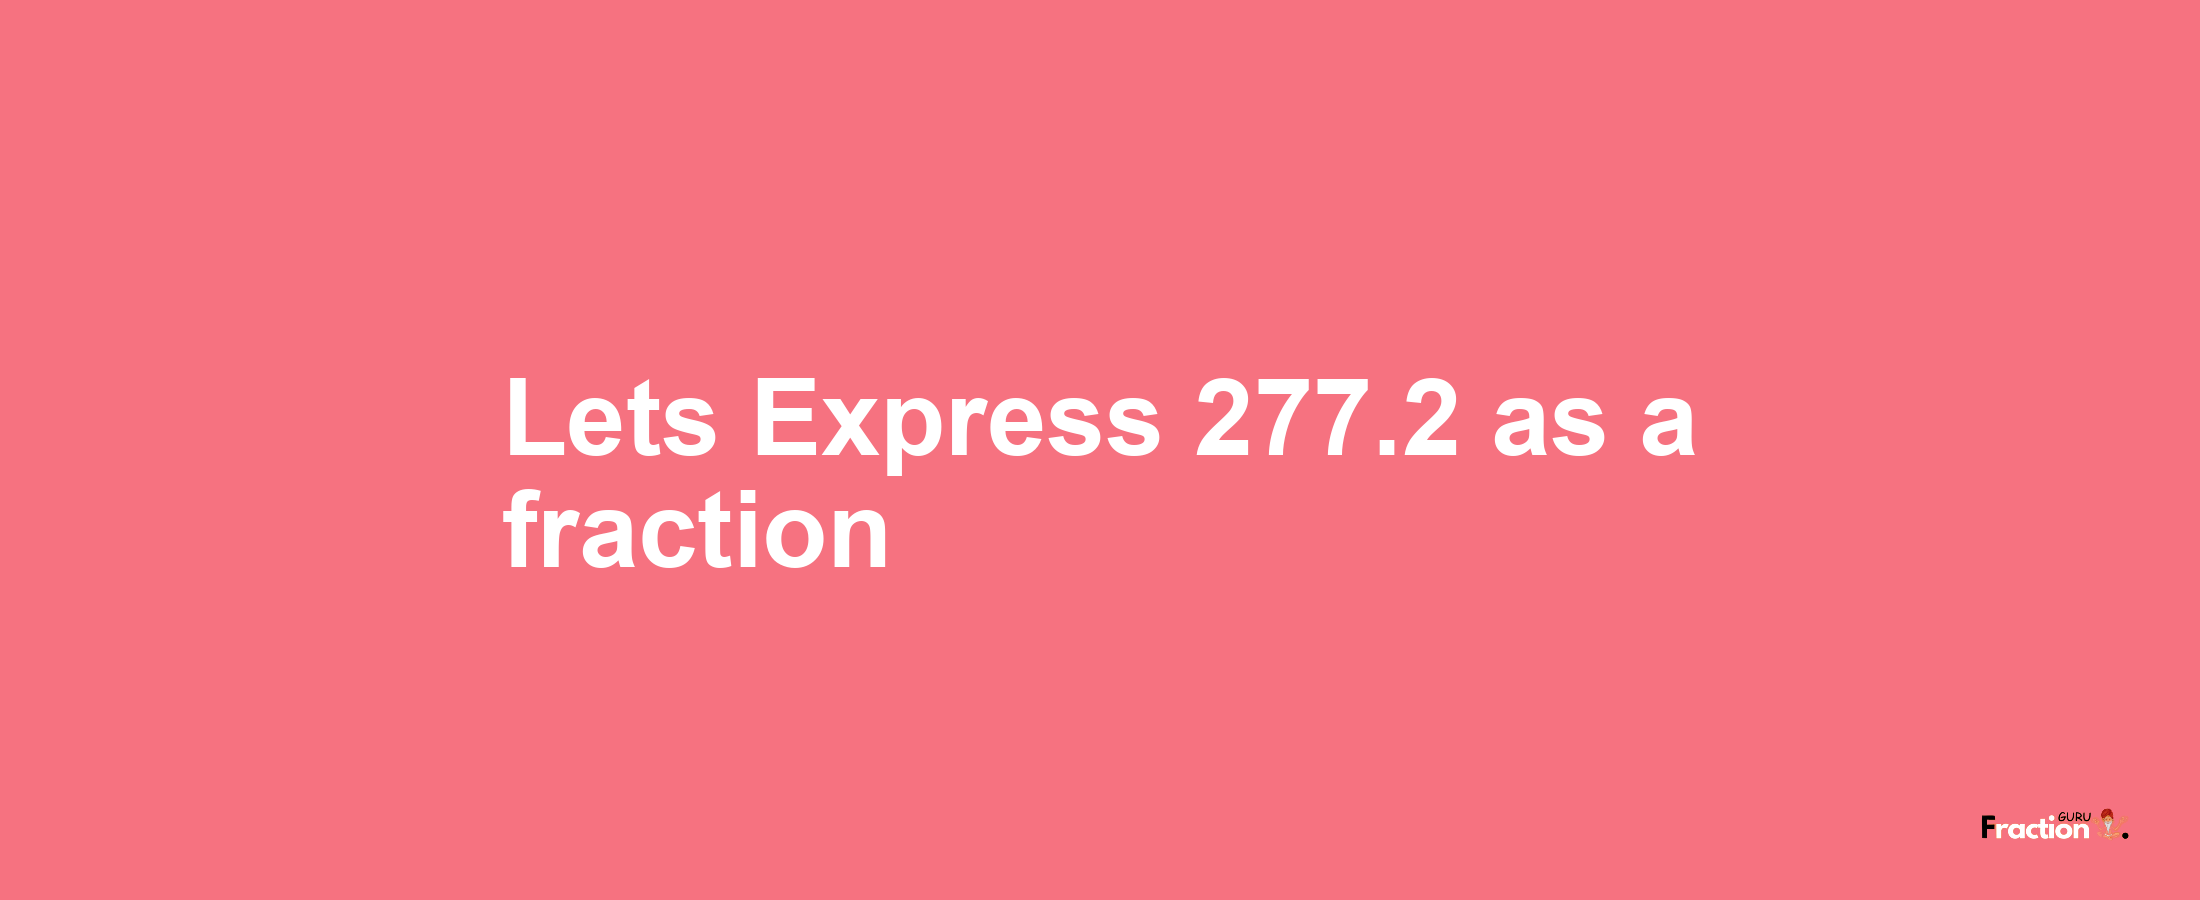 Lets Express 277.2 as afraction